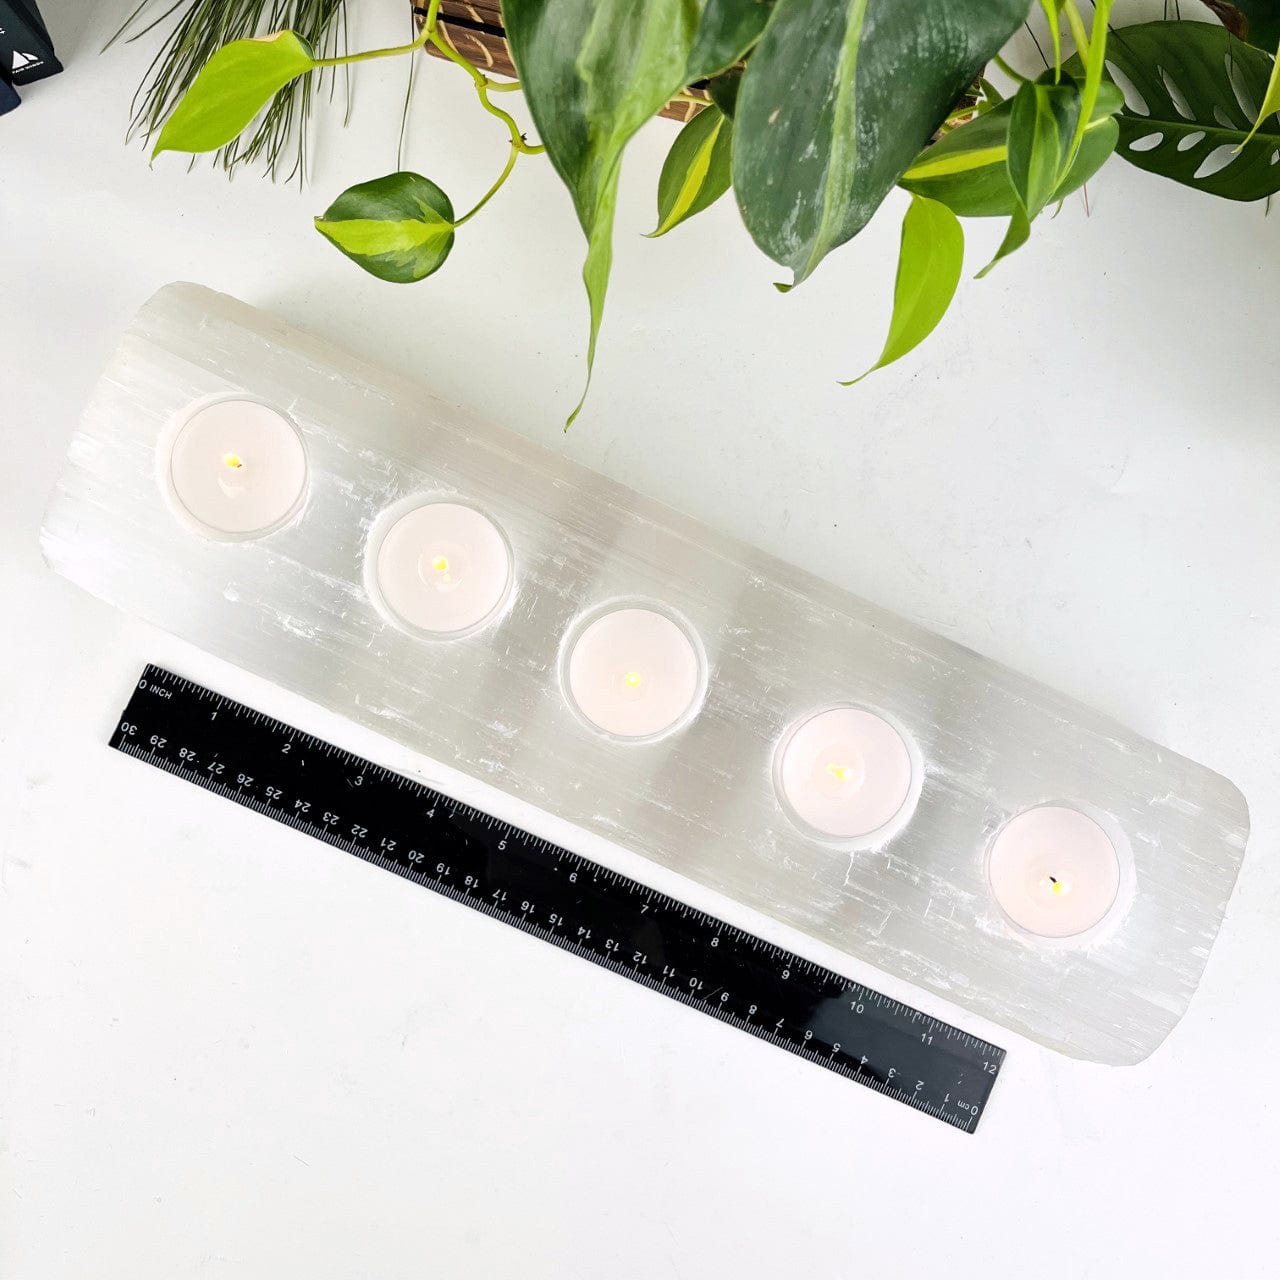 Selenite Candle Holder XL Size with 5 Holes for Votives Lit on display shown with a ruler